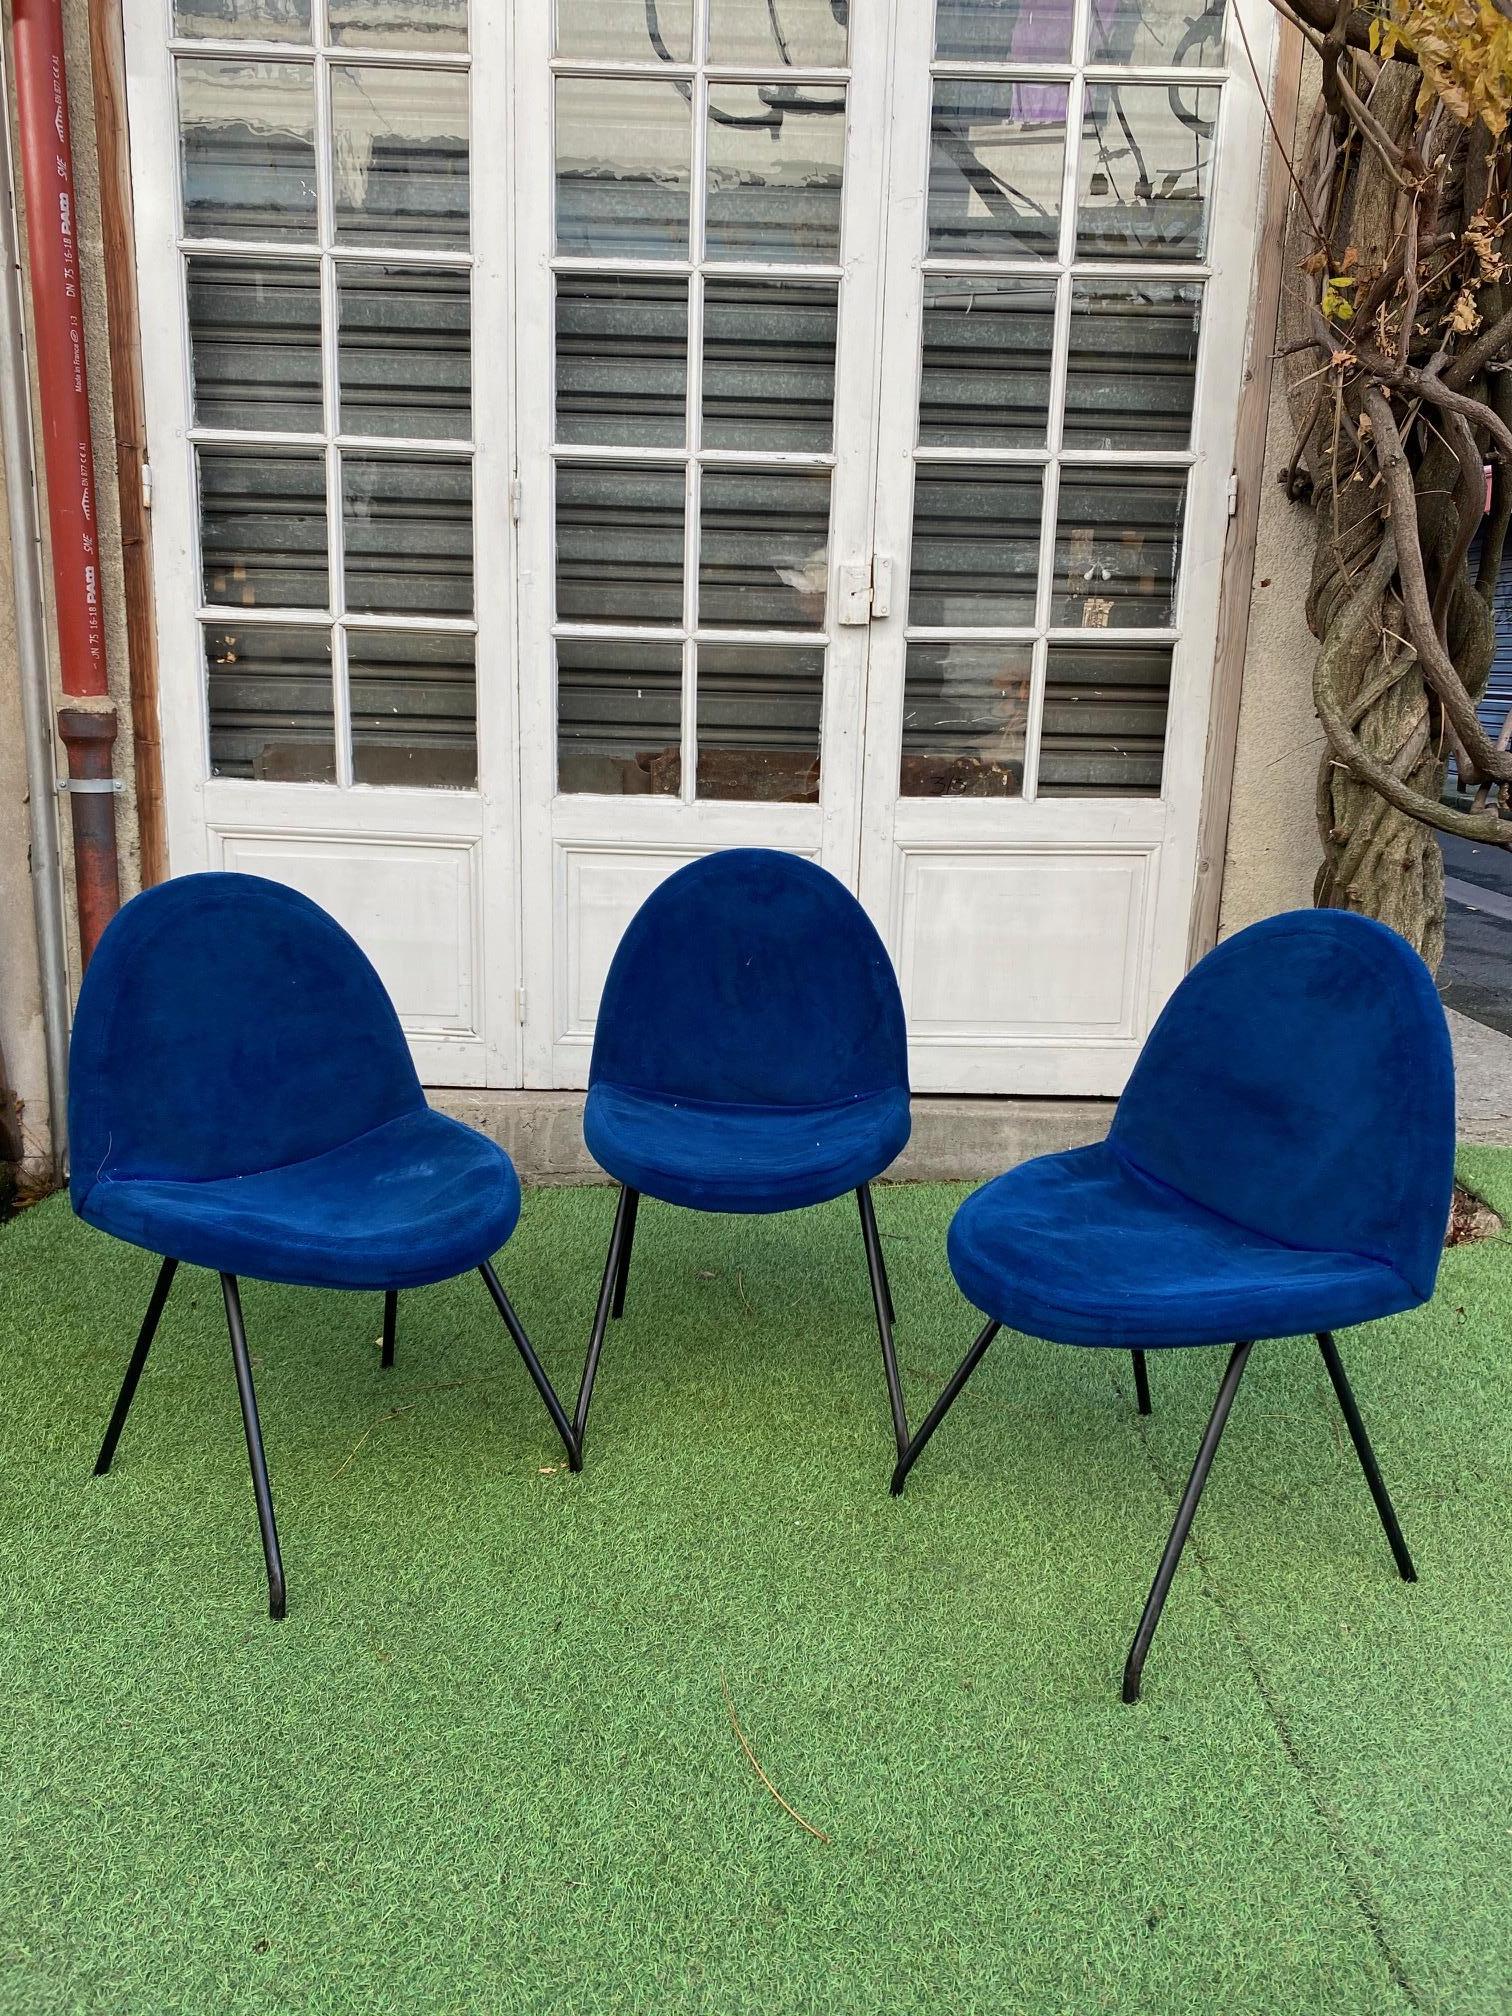 Set of three chairs, model 771, by Joseph-André Motte for Steiner, France, 1950s
Ready to be reupholstered.